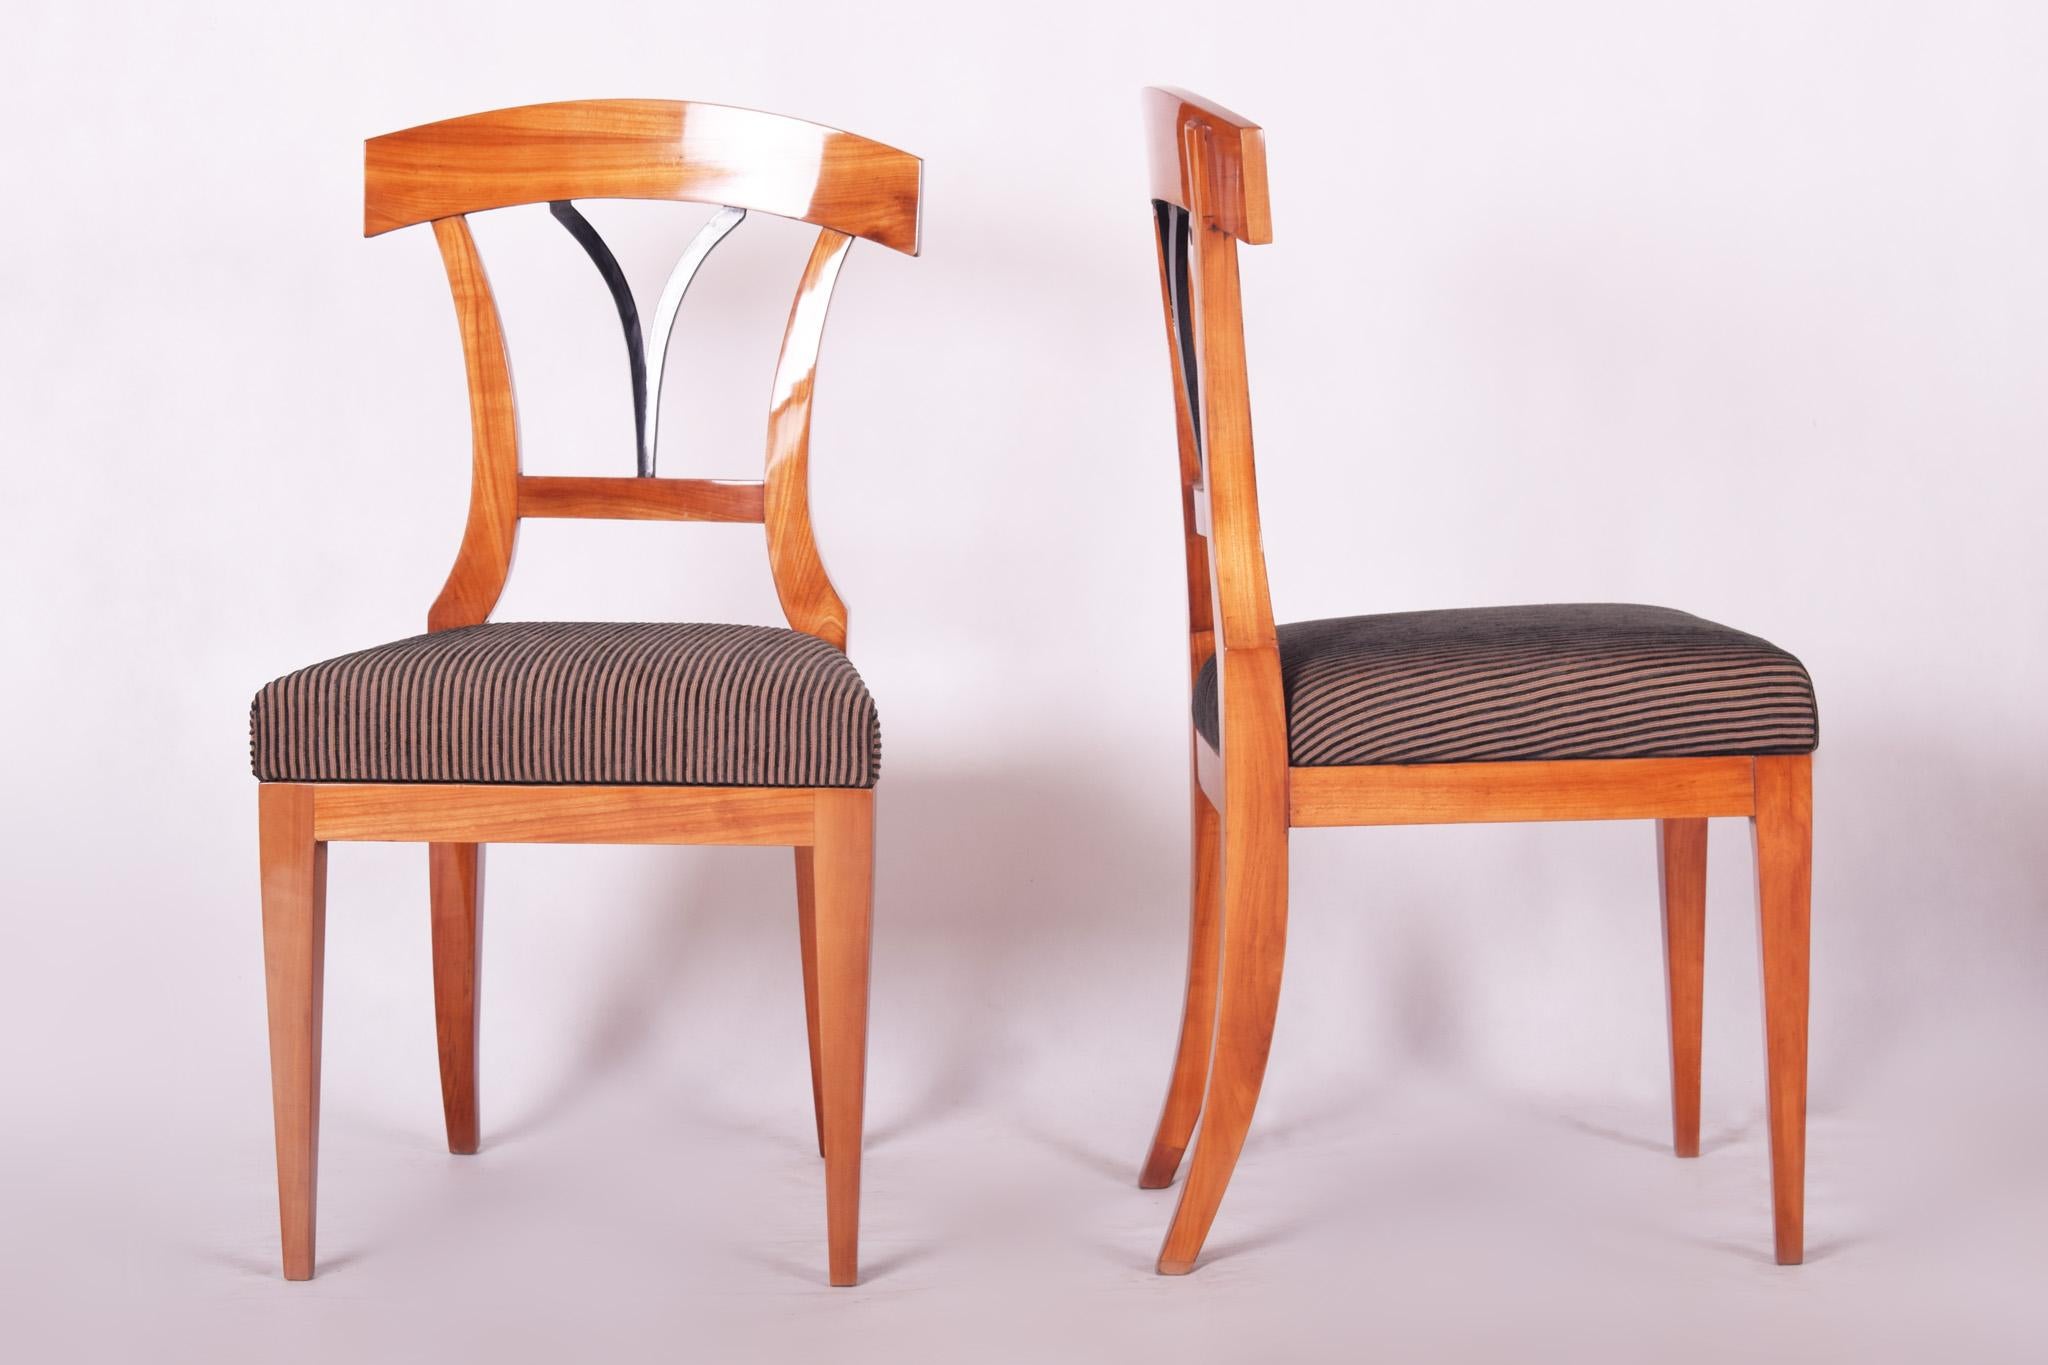 Fabric Pair of 19th Century Biedermeier Dining Chairs Made in 1930s Czechia For Sale